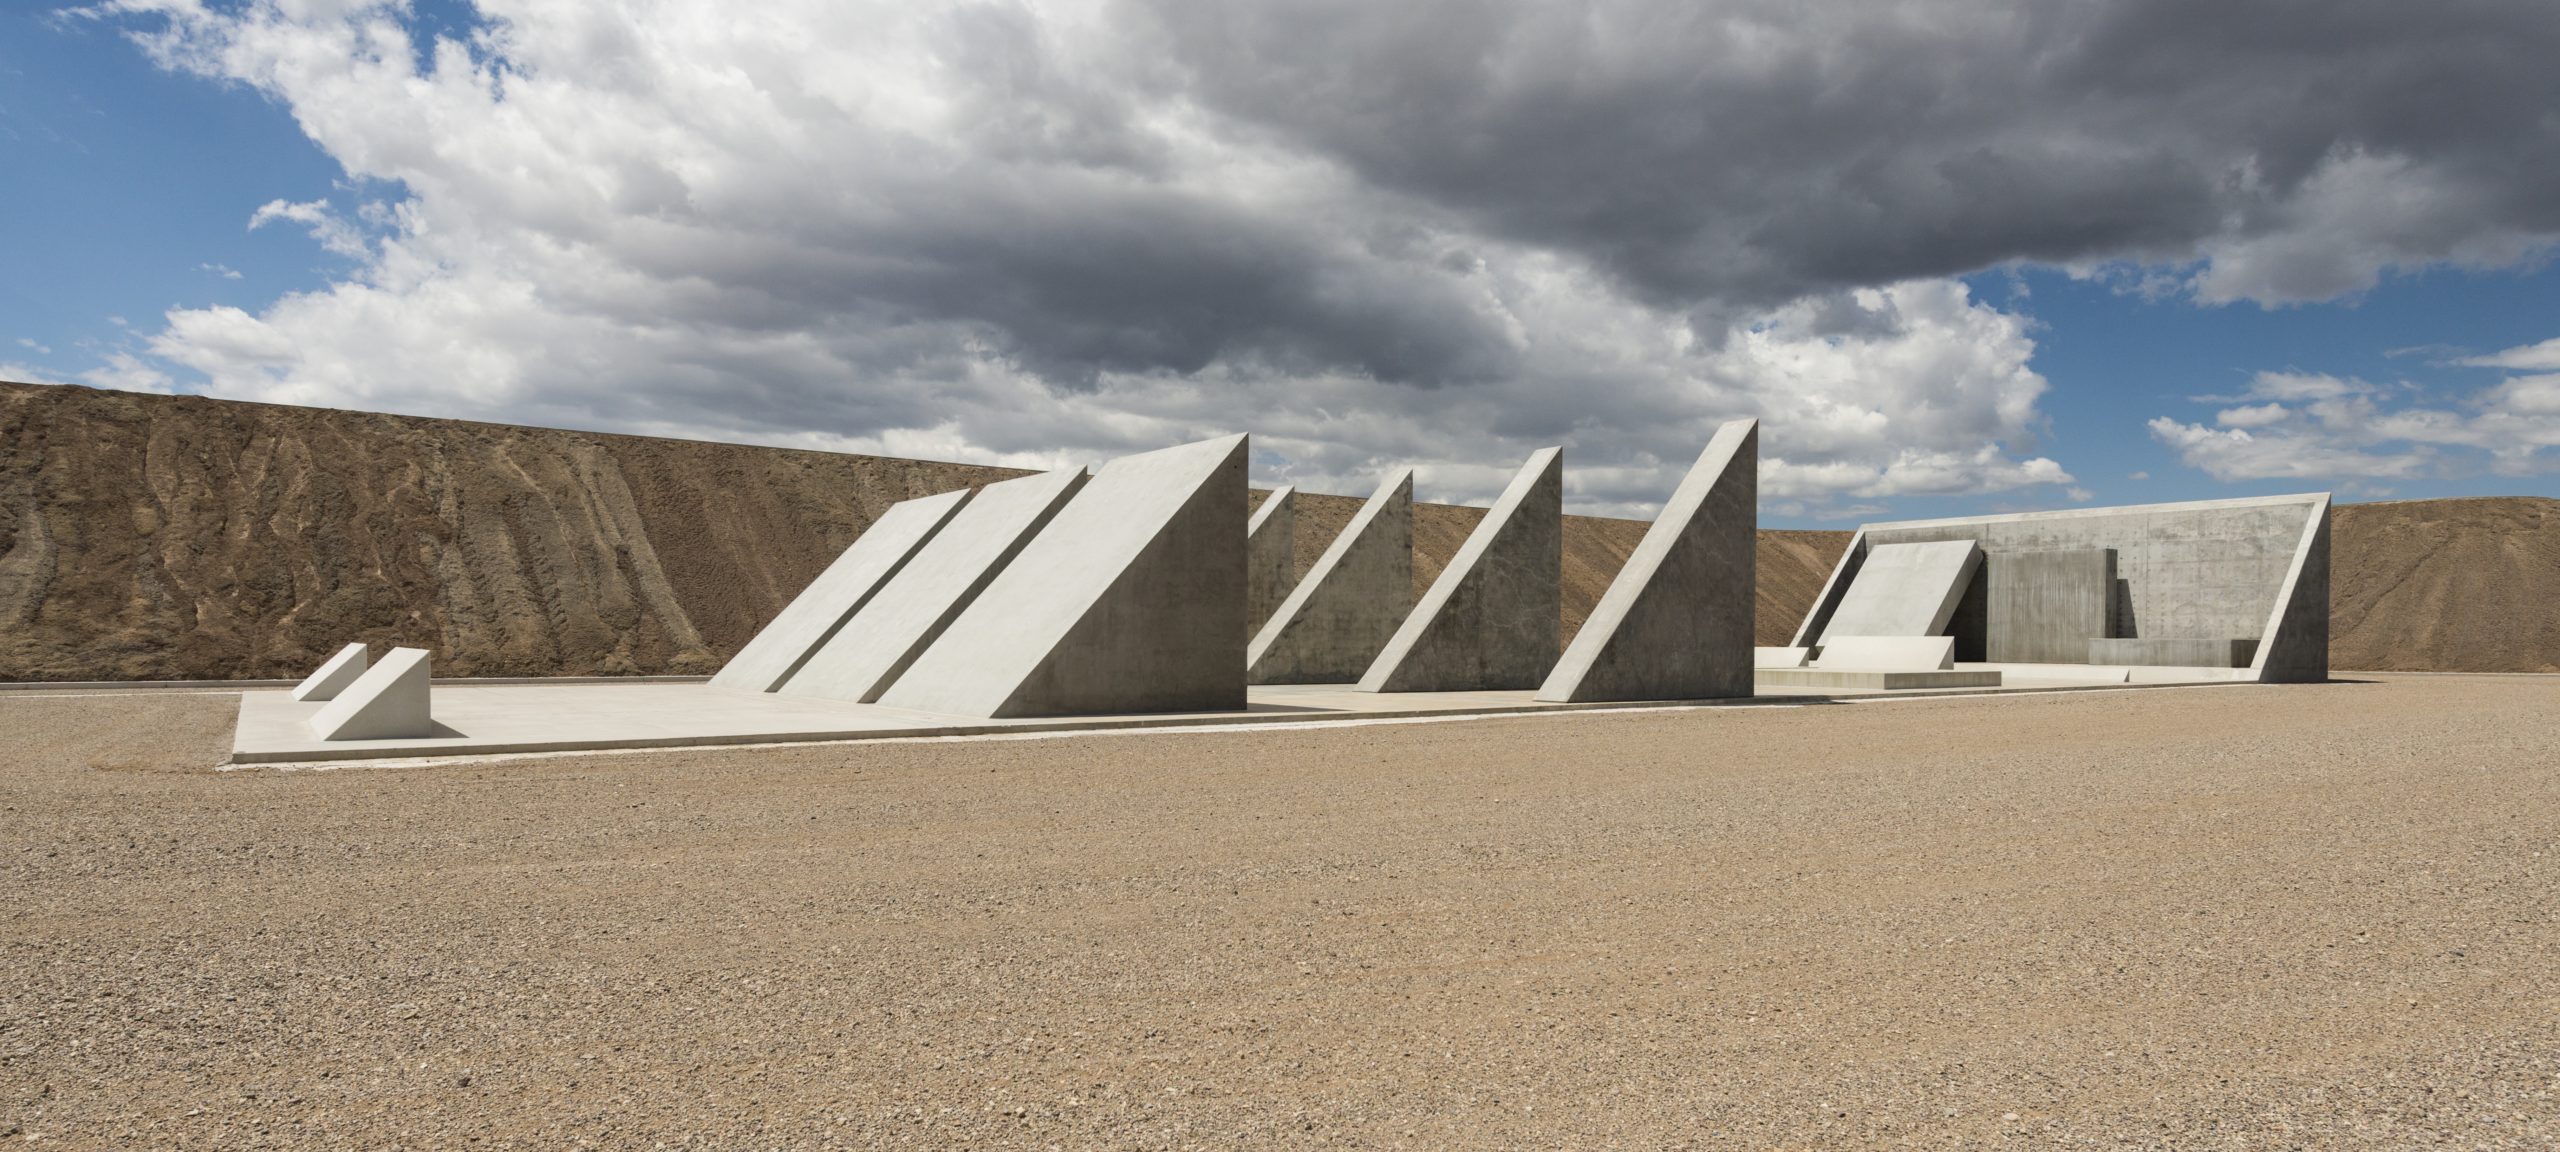 a group of concrete structures in a desert